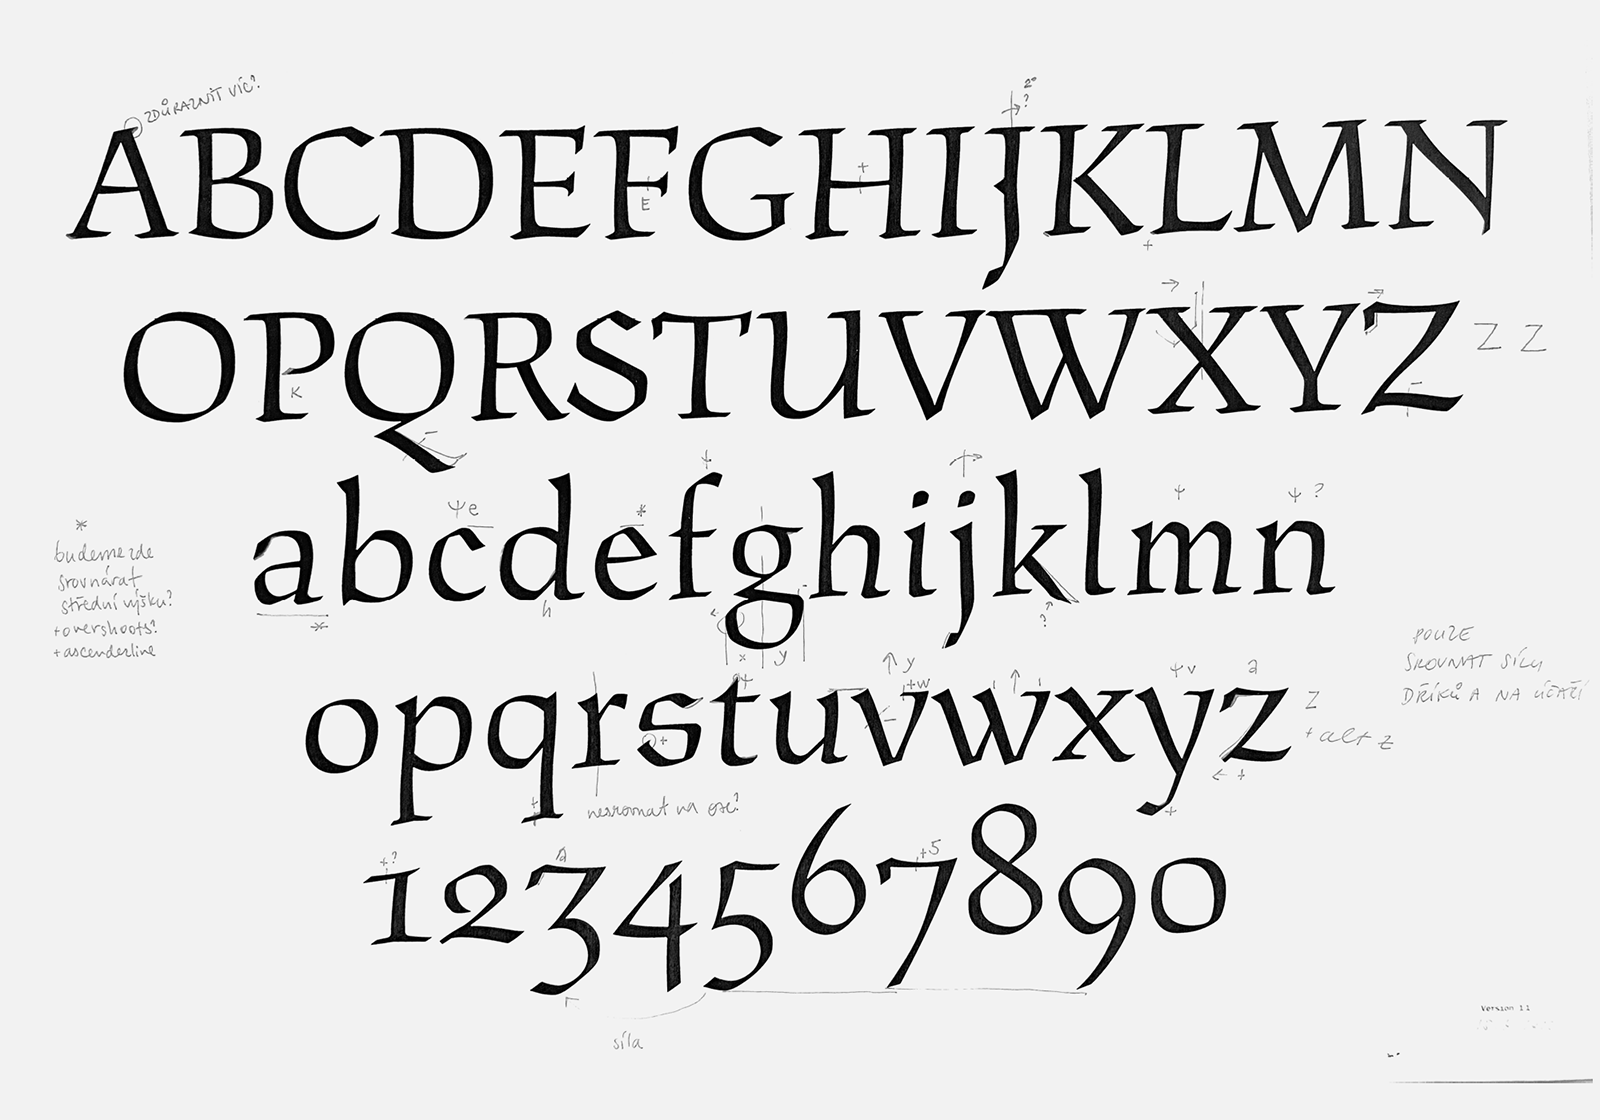 A series of corrections to the Parlament typeface carried out on the authentic version.